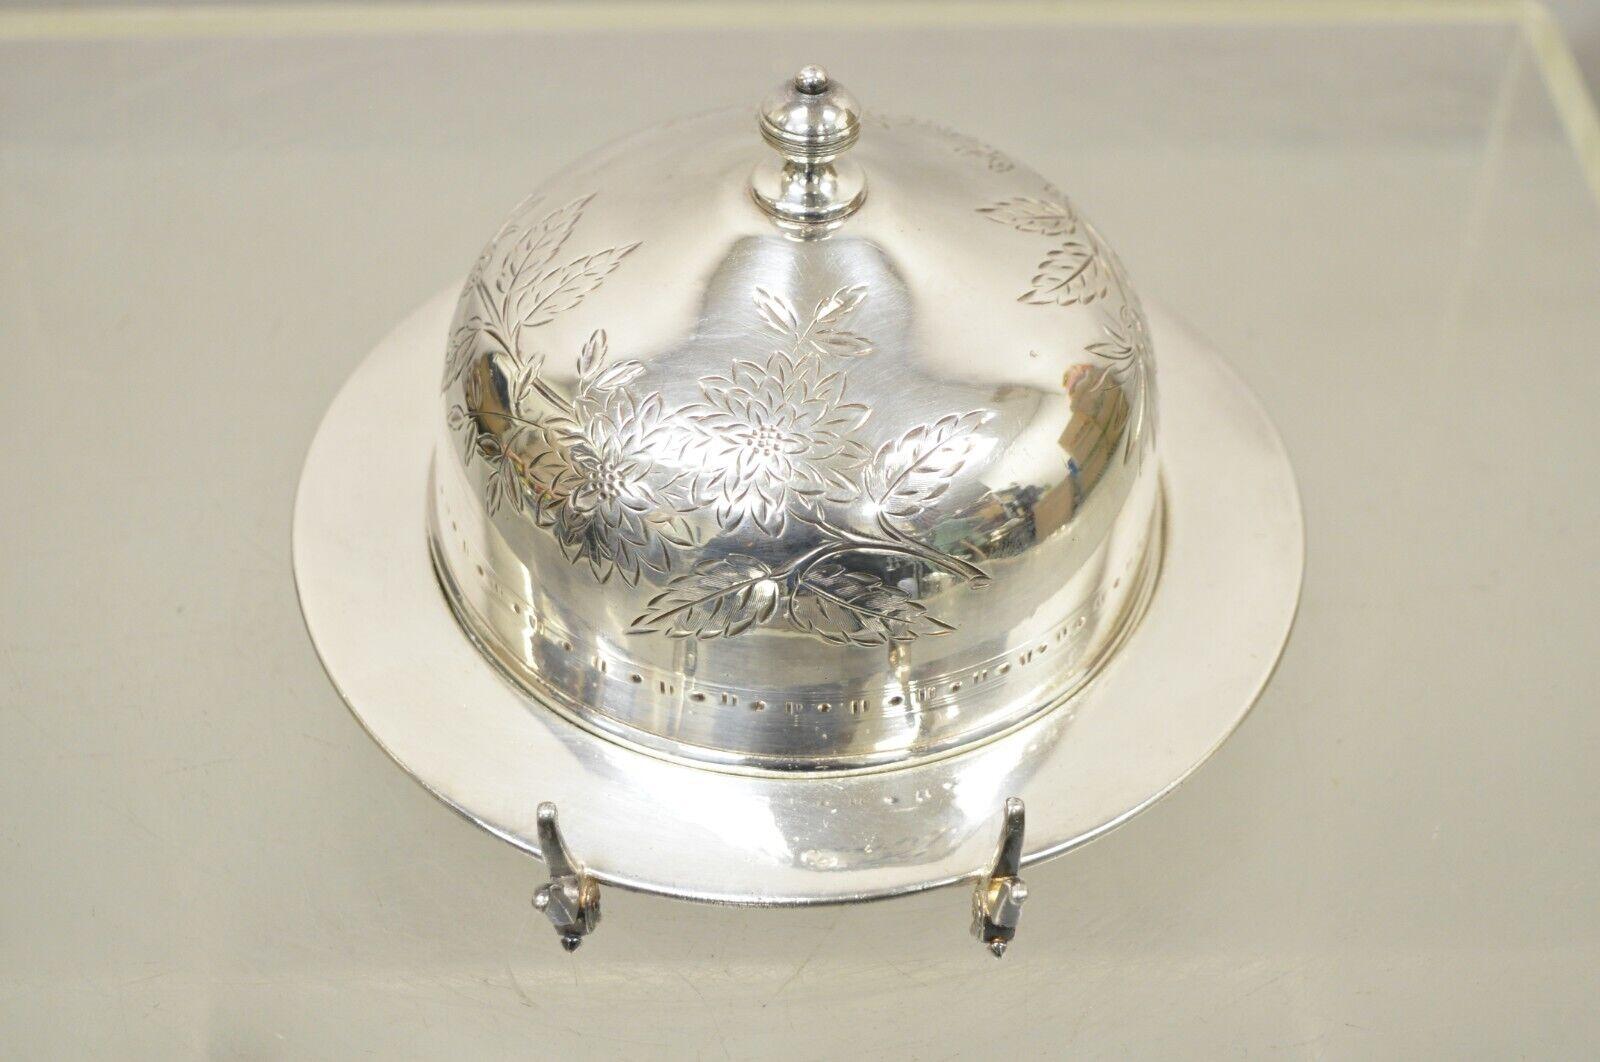 Antique Victorian Meriden B. Company 1972 Silver Plated Victorian Butter Dish. Item features a floral Etched Design, Domed Lid, Original Hallmark, Made in USA. Circa Mid 20th Century. Measurements: 5